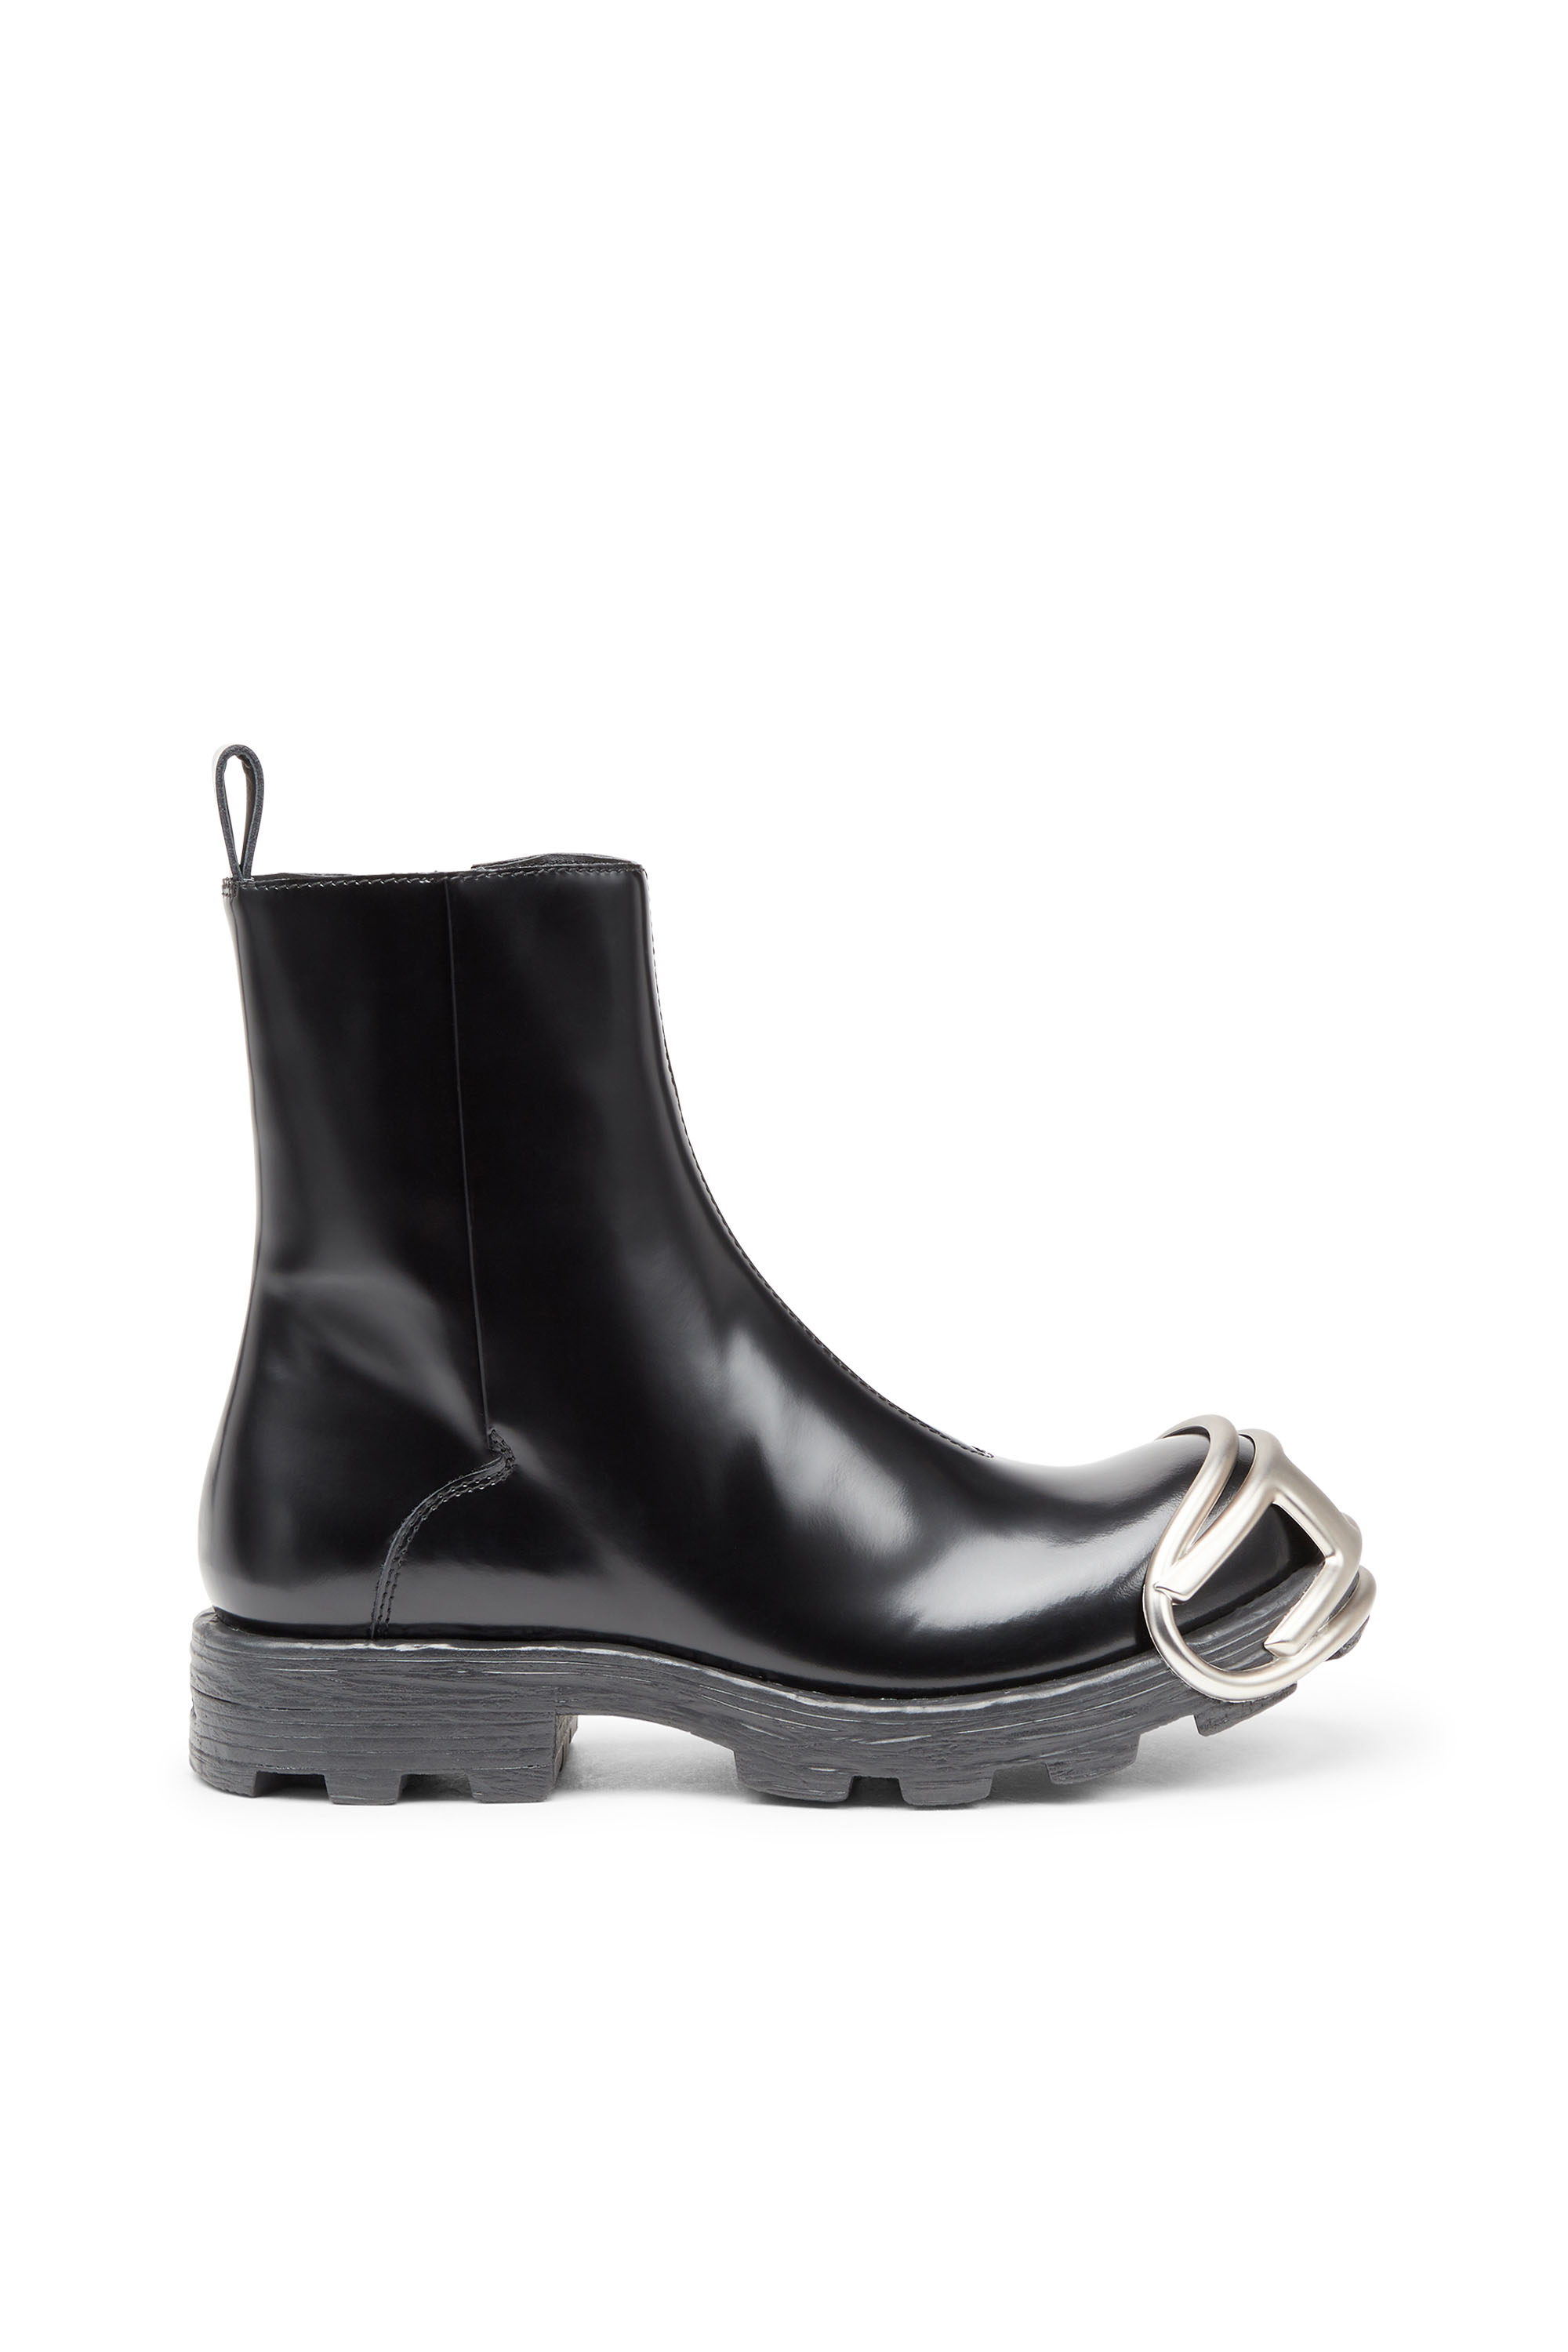 D-Hammer Bt Zip D - Leather Chelsea boots with Oval D toe caps